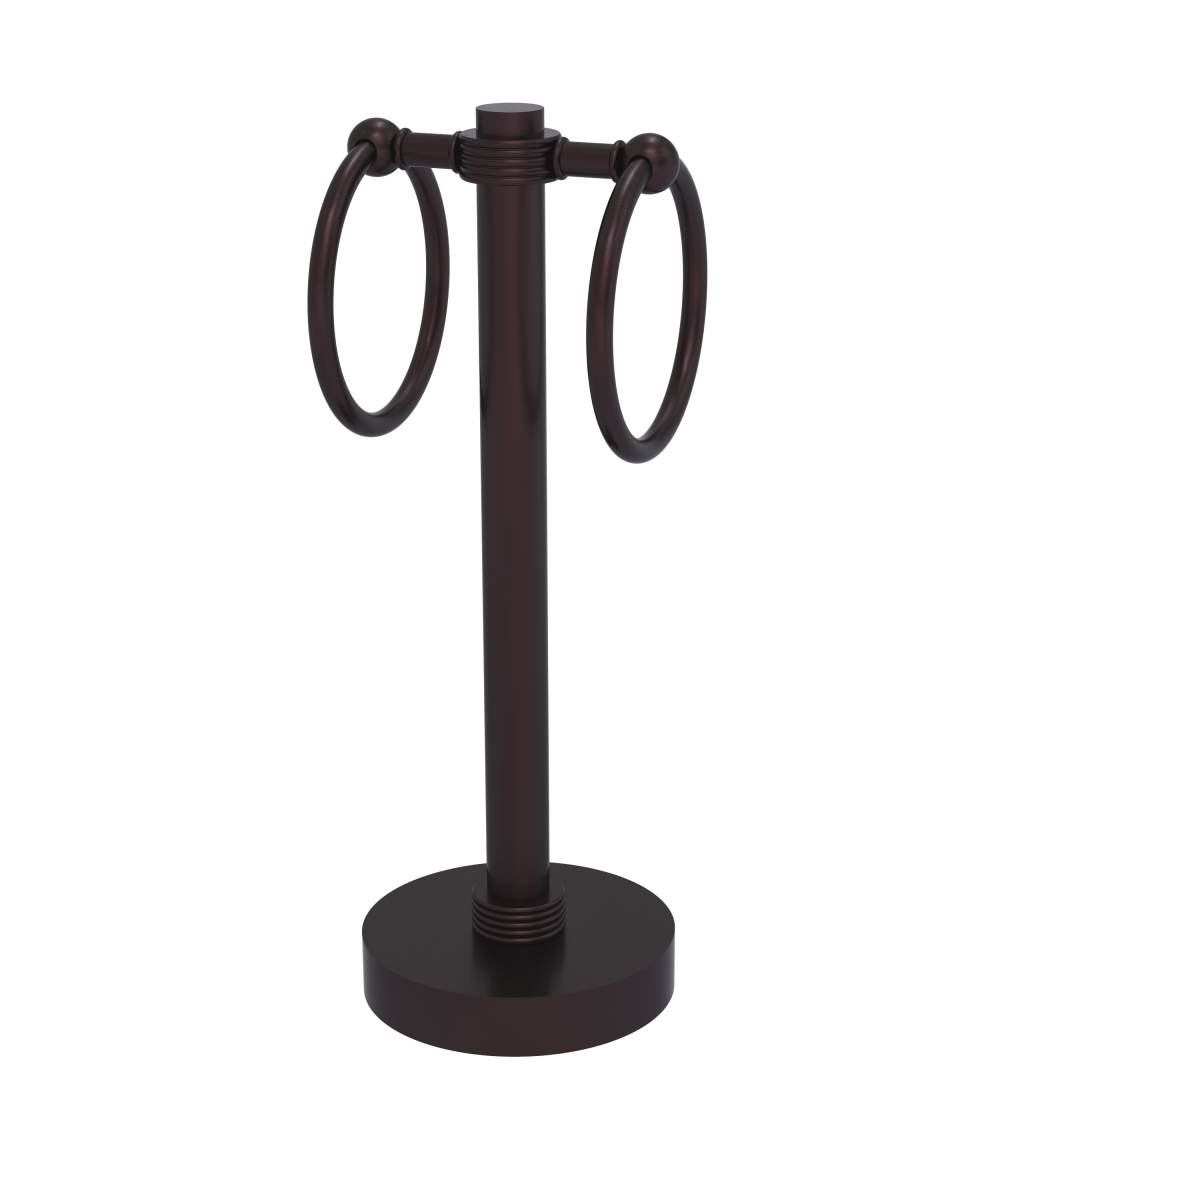 953g-abz Vanity Top 2 Towel Ring Guest Towel Holder With Groovy Accents, Antique Bronze